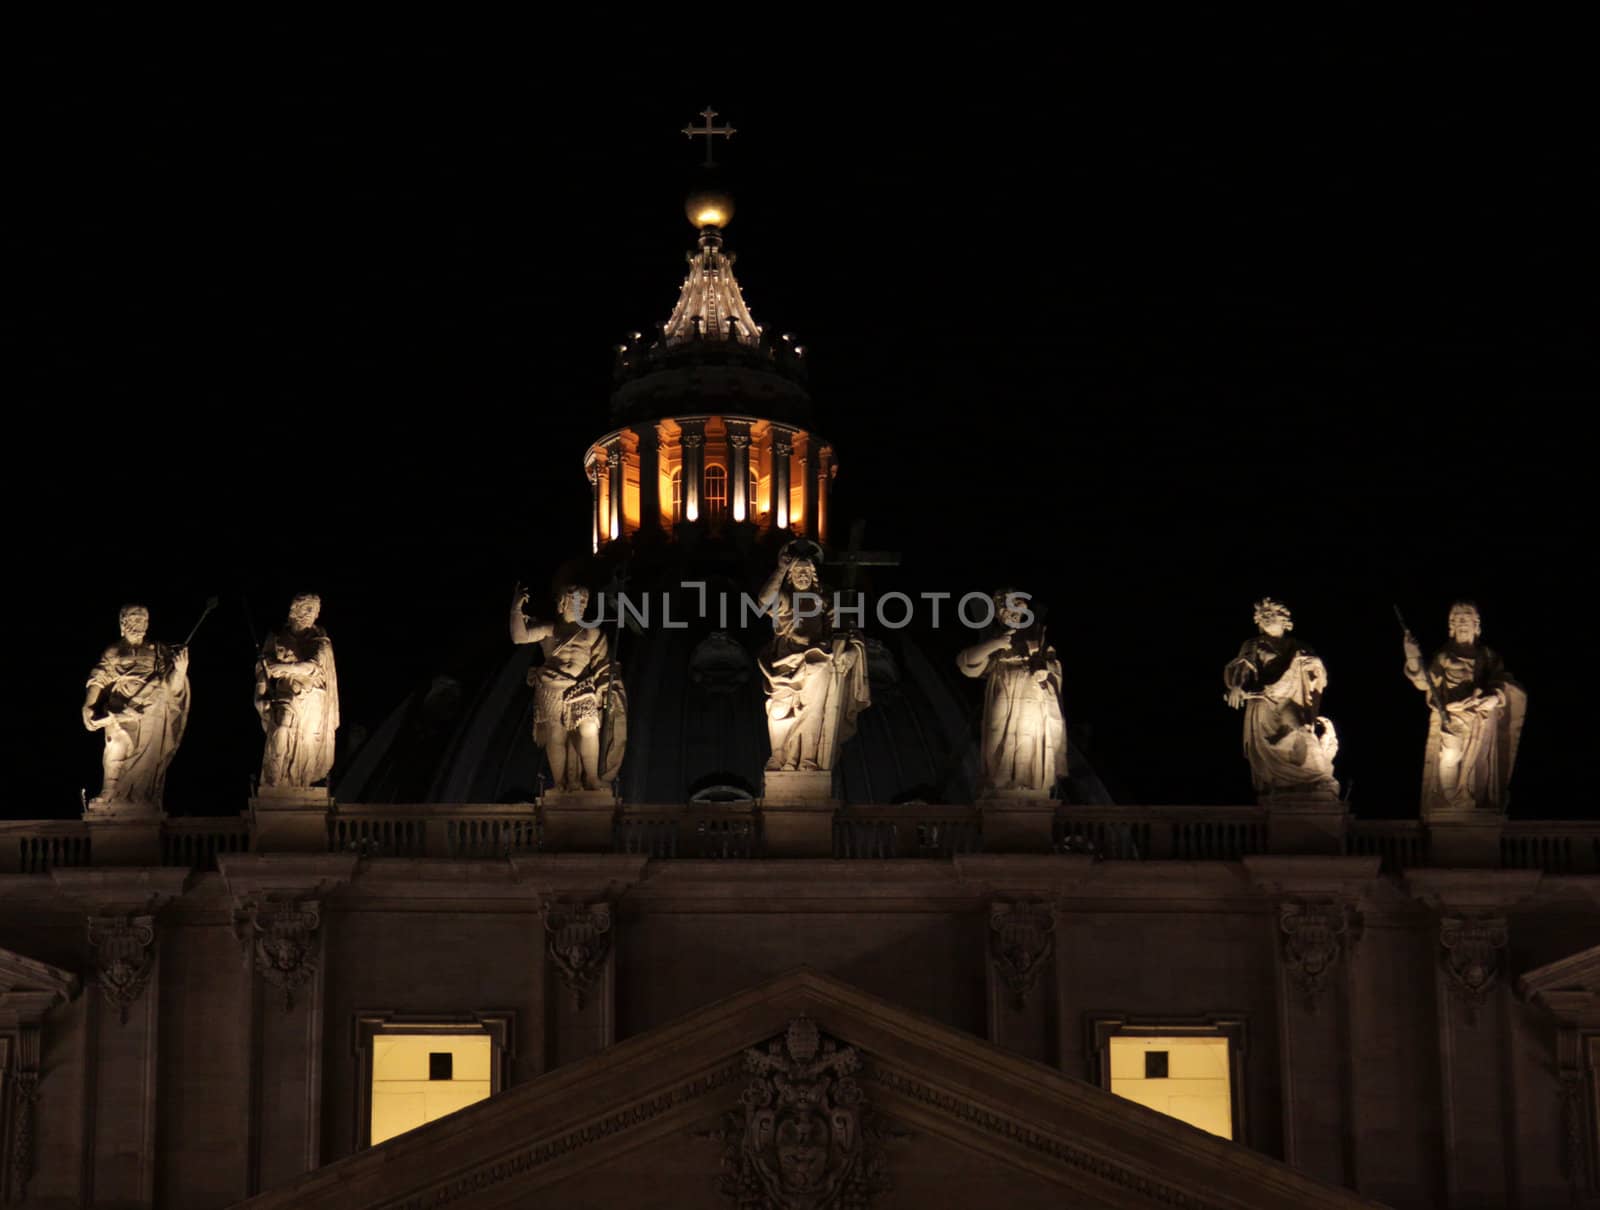 Top of St. Peter's Basilica
 by ca2hill